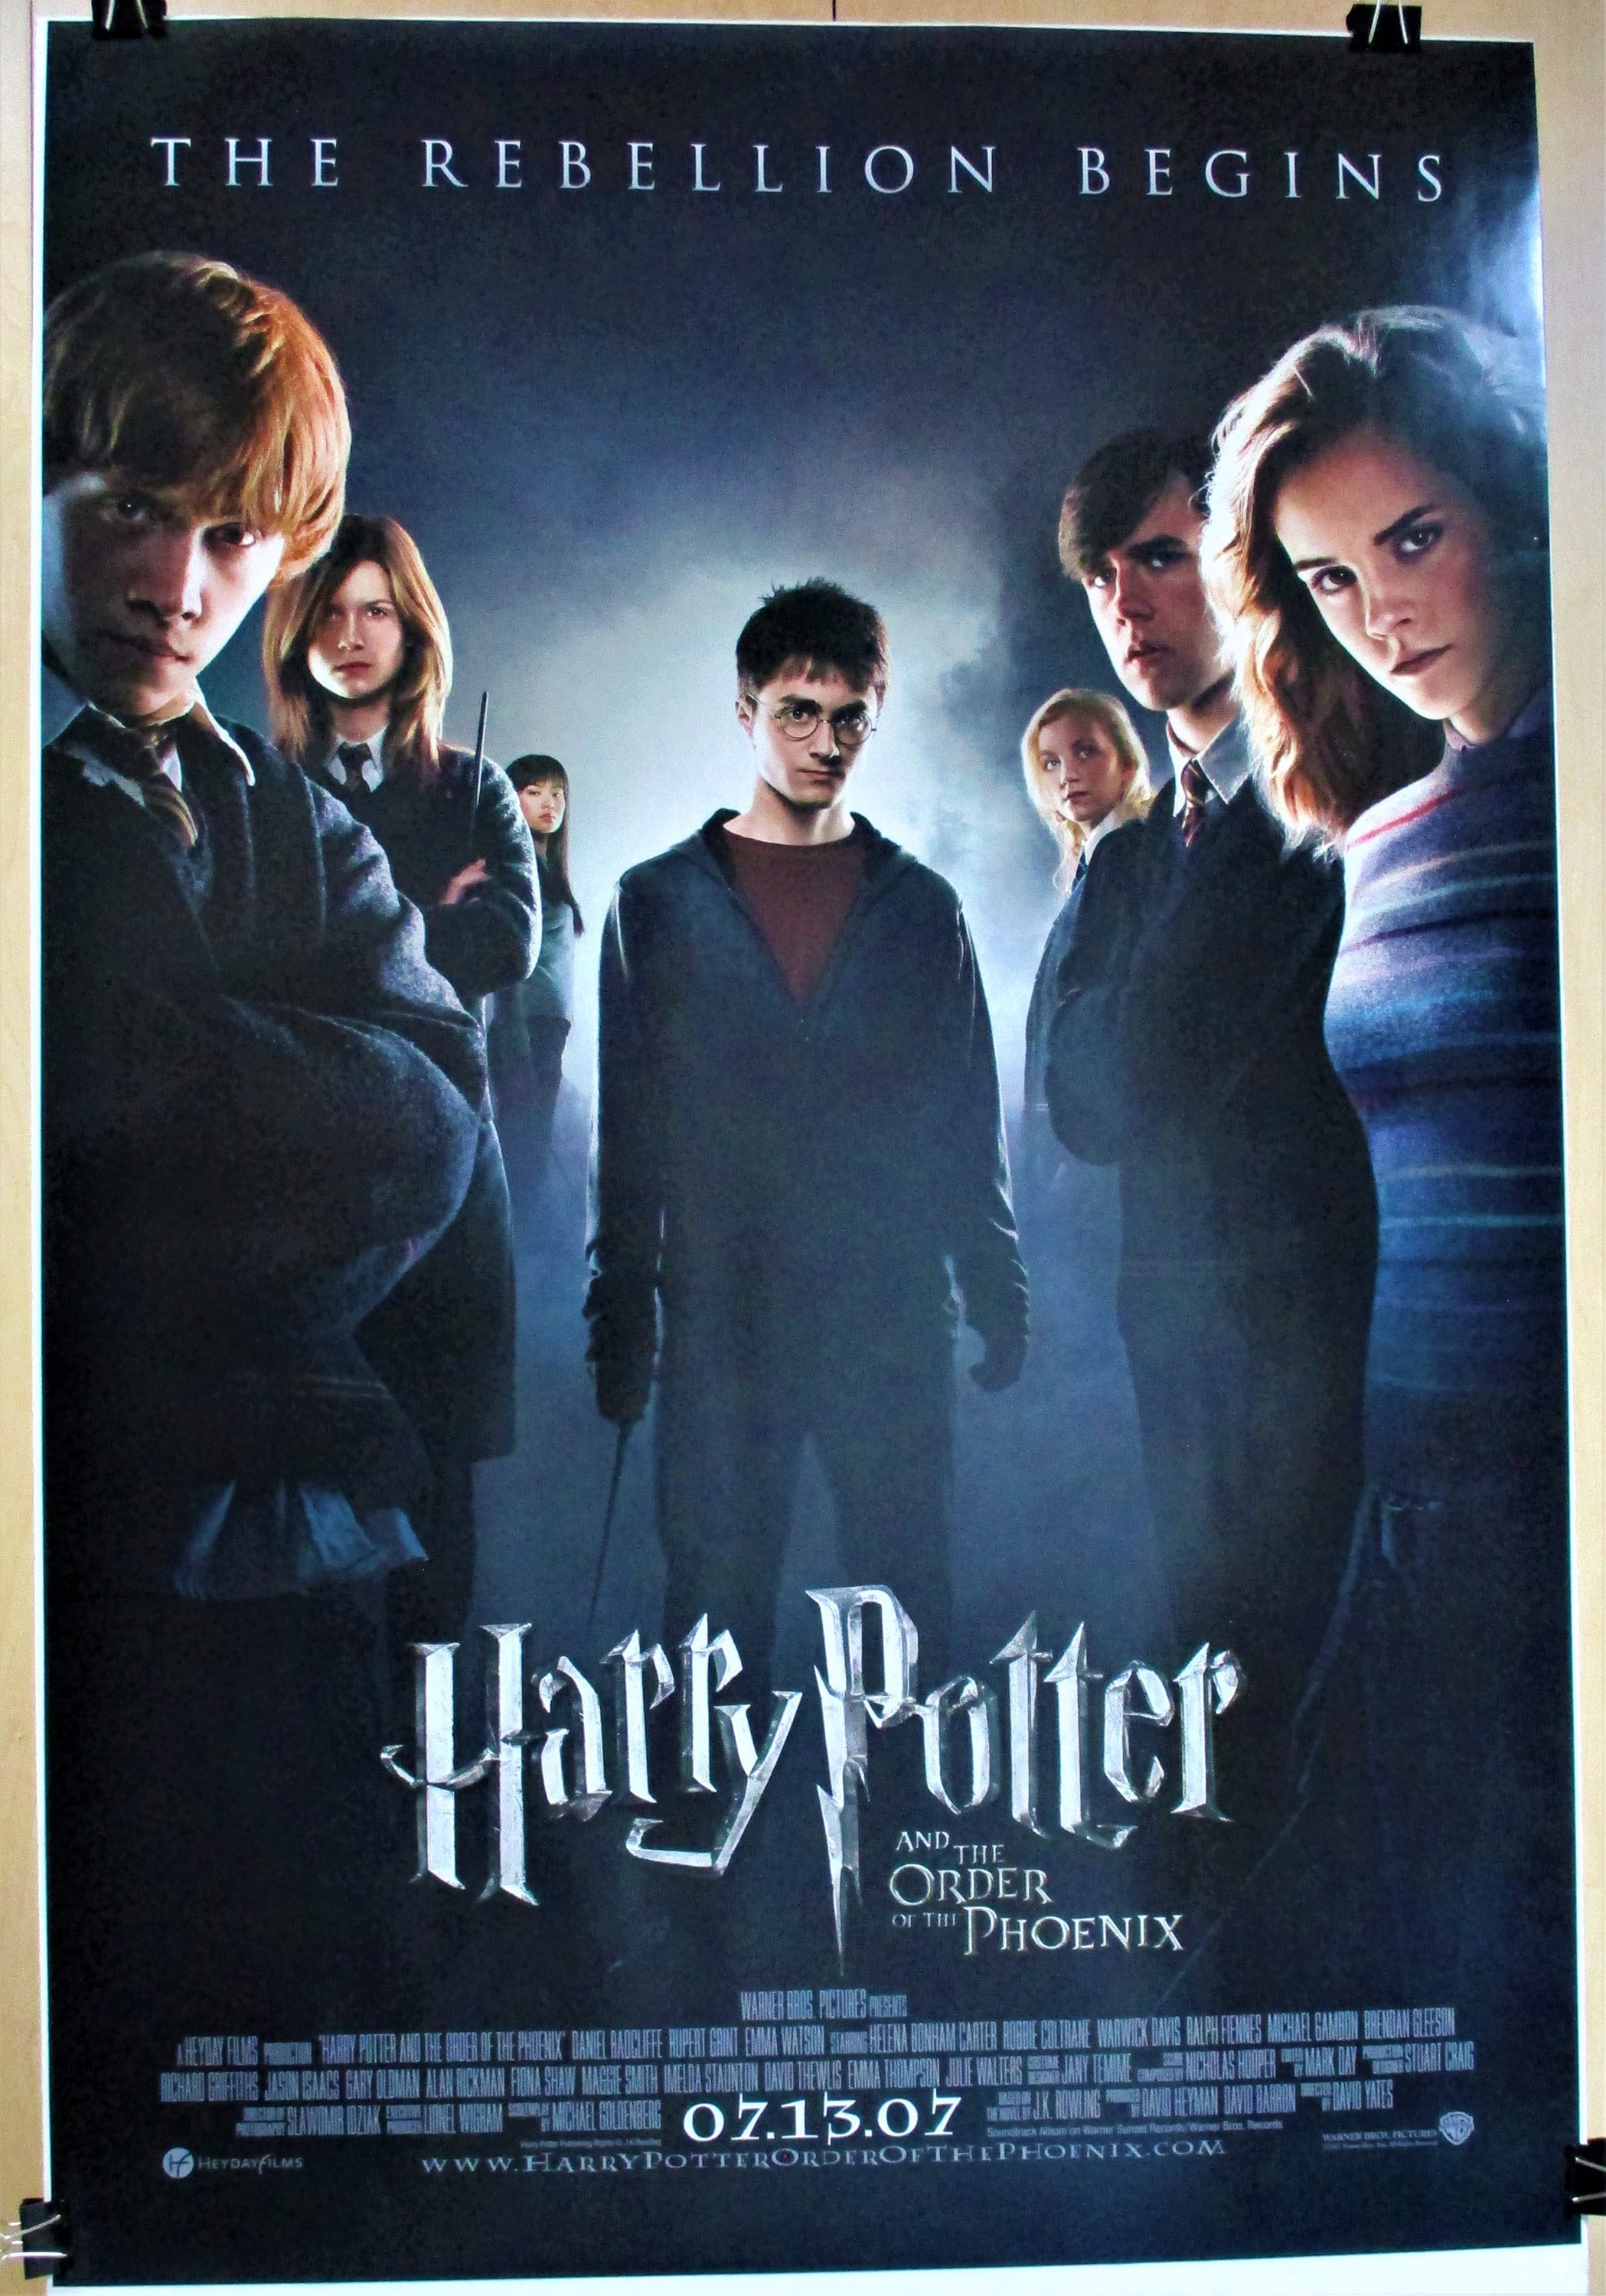 Harry Potter Poster Collection  Book by . Warner Bros. Consumer